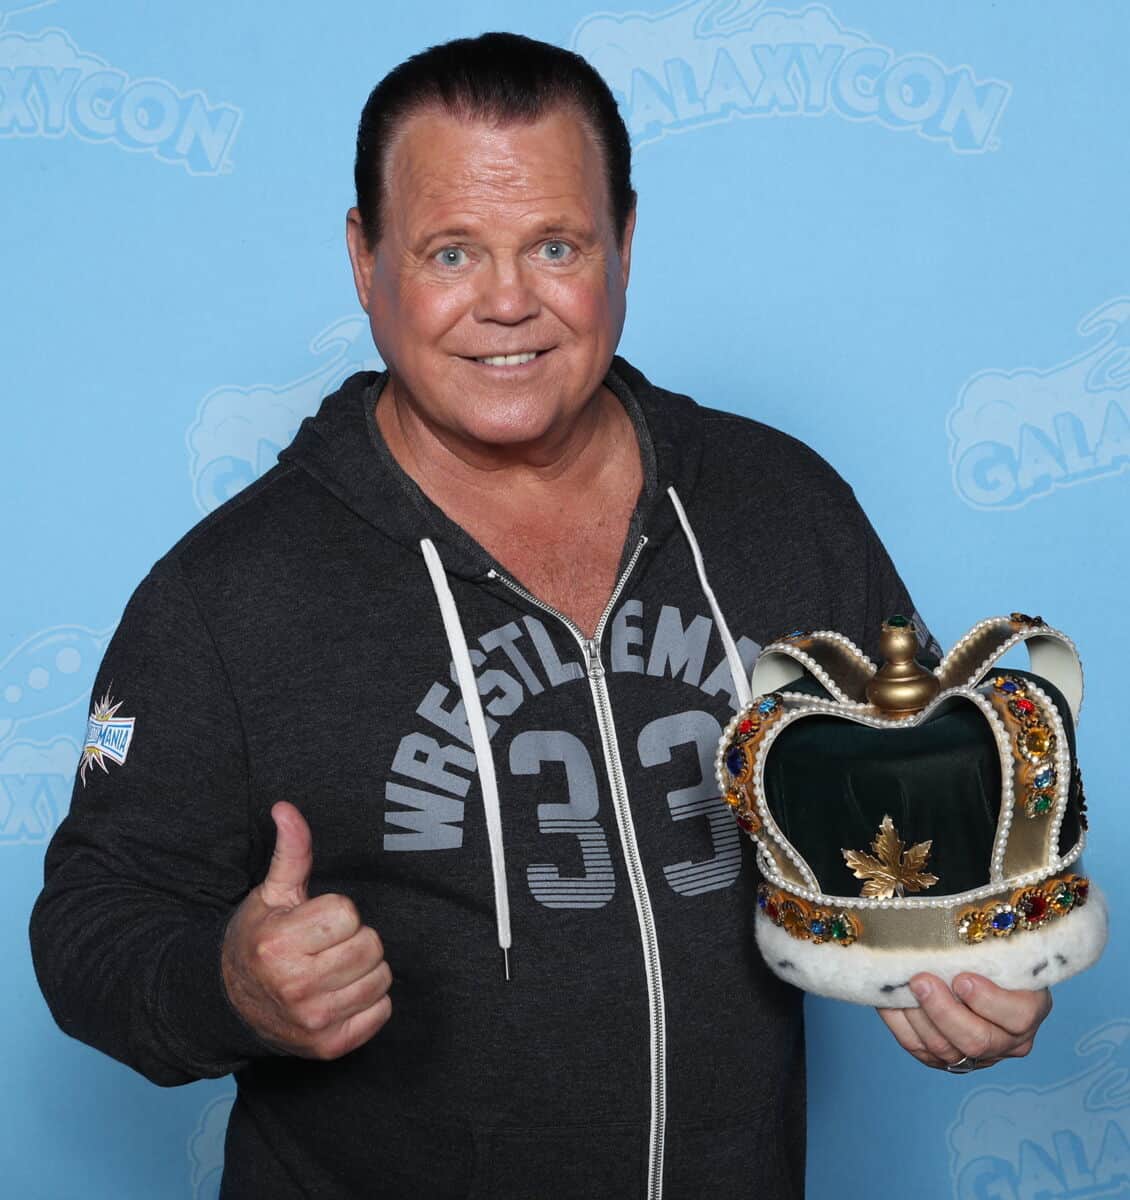 Jerry Lawler - Famous Commentator